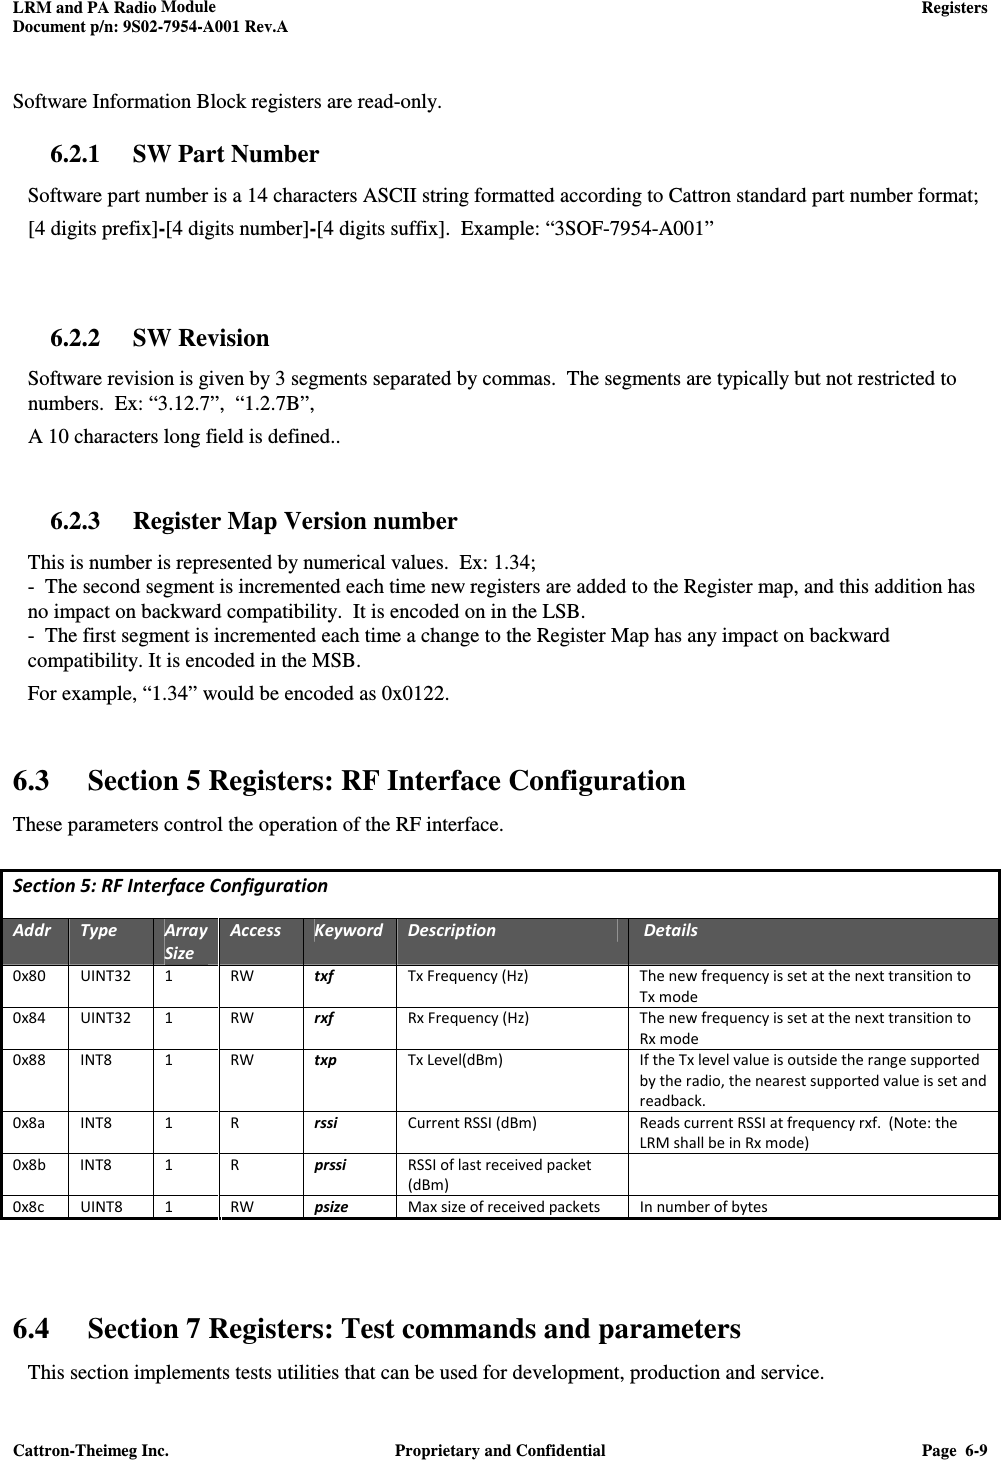 LRM and PA Radio Module    Registers  Document p/n: 9S02-7954-A001 Rev.A  Cattron-Theimeg Inc.  Proprietary and Confidential  Page  6-9   Software Information Block registers are read-only. 6.2.1 SW Part Number Software part number is a 14 characters ASCII string formatted according to Cattron standard part number format; [4 digits prefix]-[4 digits number]-[4 digits suffix].  Example: “3SOF-7954-A001”   6.2.2 SW Revision Software revision is given by 3 segments separated by commas.  The segments are typically but not restricted to numbers.  Ex: “3.12.7”,  “1.2.7B”,    A 10 characters long field is defined..  6.2.3 Register Map Version number This is number is represented by numerical values.  Ex: 1.34; -  The second segment is incremented each time new registers are added to the Register map, and this addition has no impact on backward compatibility.  It is encoded on in the LSB. -  The first segment is incremented each time a change to the Register Map has any impact on backward compatibility. It is encoded in the MSB. For example, “1.34” would be encoded as 0x0122.   6.3 Section 5 Registers: RF Interface Configuration These parameters control the operation of the RF interface.  Section 5: RF Interface Configuration  Addr  Type  Array Size Access  Keyword  Description   Details 0x80  UINT32  1  RW  txf  Tx Frequency (Hz)  The new frequency is set at the next transition to Tx mode 0x84  UINT32  1  RW  rxf  Rx Frequency (Hz)  The new frequency is set at the next transition to Rx mode 0x88  INT8  1  RW  txp  Tx Level(dBm)  If the Tx level value is outside the range supported by the radio, the nearest supported value is set and readback. 0x8a  INT8  1  R  rssi  Current RSSI (dBm)  Reads current RSSI at frequency rxf.  (Note: the LRM shall be in Rx mode) 0x8b  INT8  1  R  prssi  RSSI of last received packet (dBm)  0x8c  UINT8  1  RW  psize  Max size of received packets  In number of bytes     6.4 Section 7 Registers: Test commands and parameters This section implements tests utilities that can be used for development, production and service.  